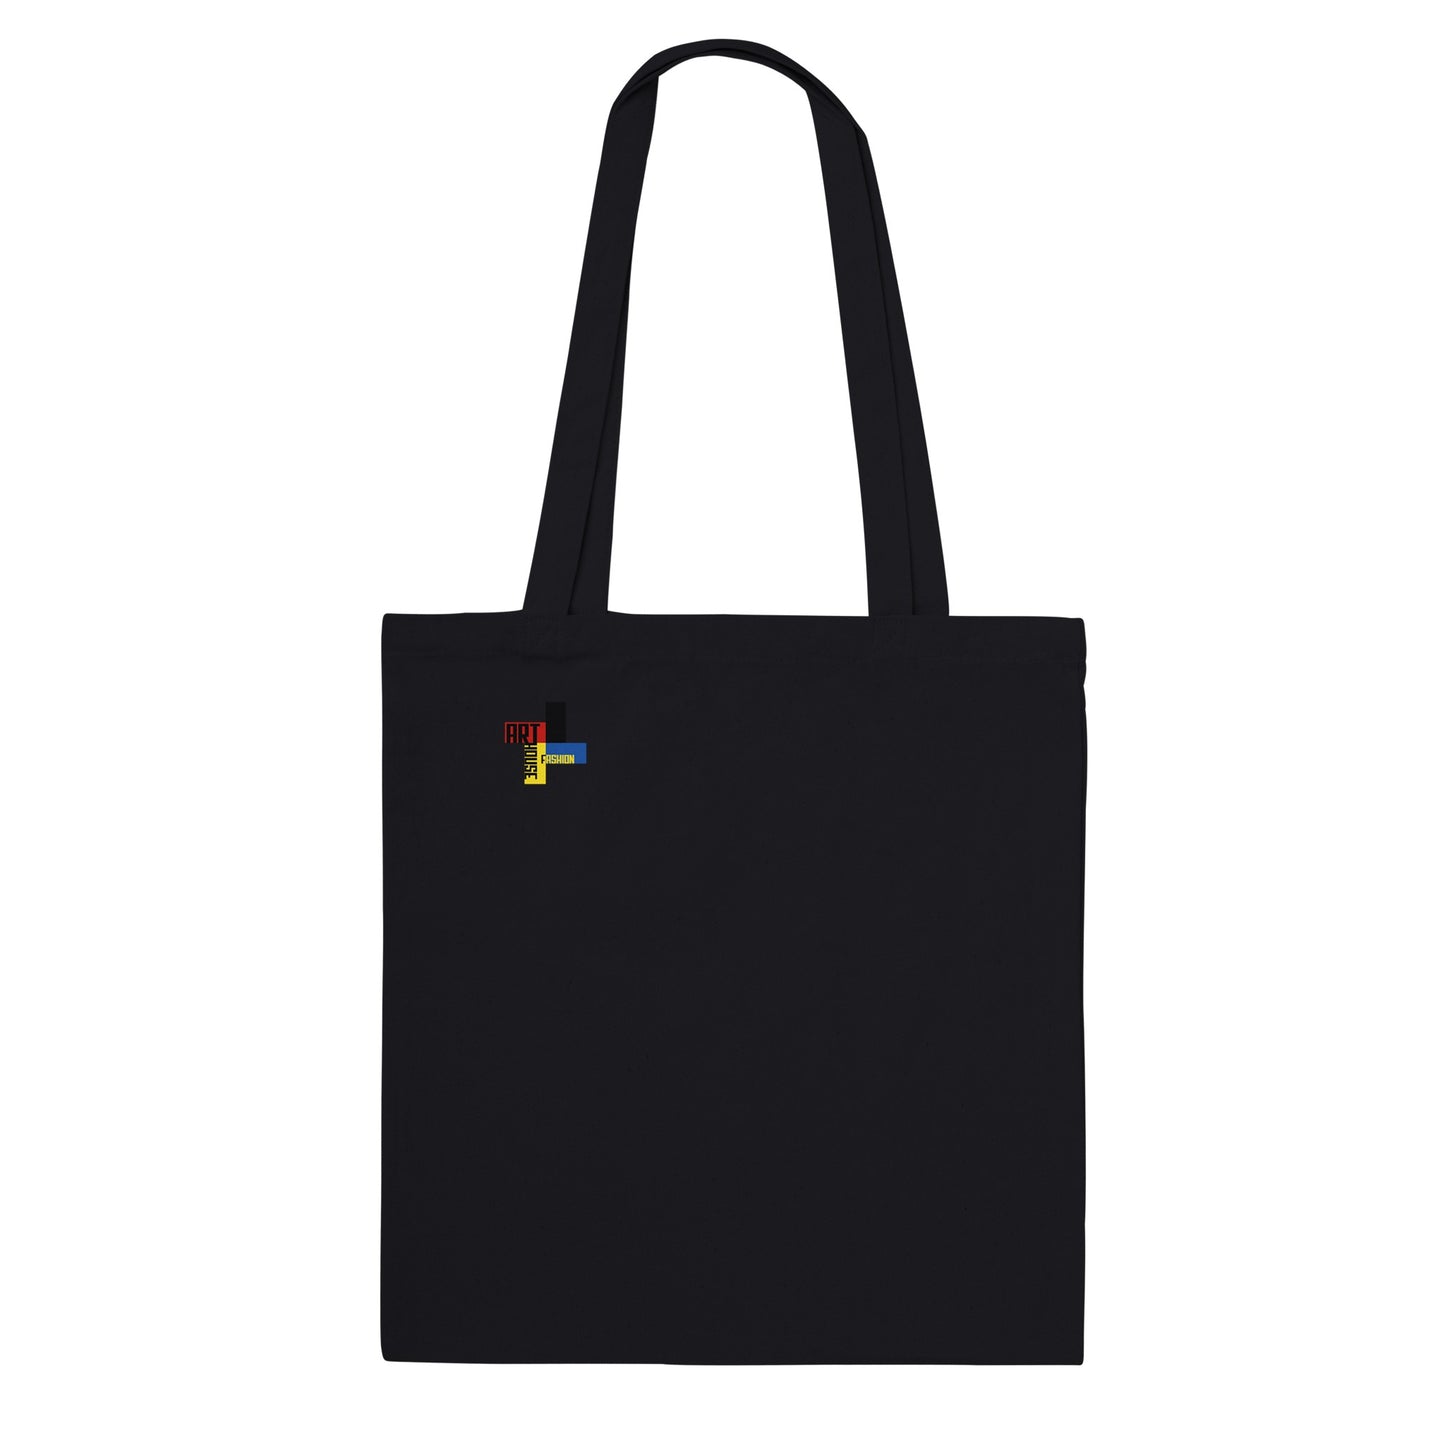 WASSILY KANDINSKY - UNTITLED - CLASSIC TOTE BAG